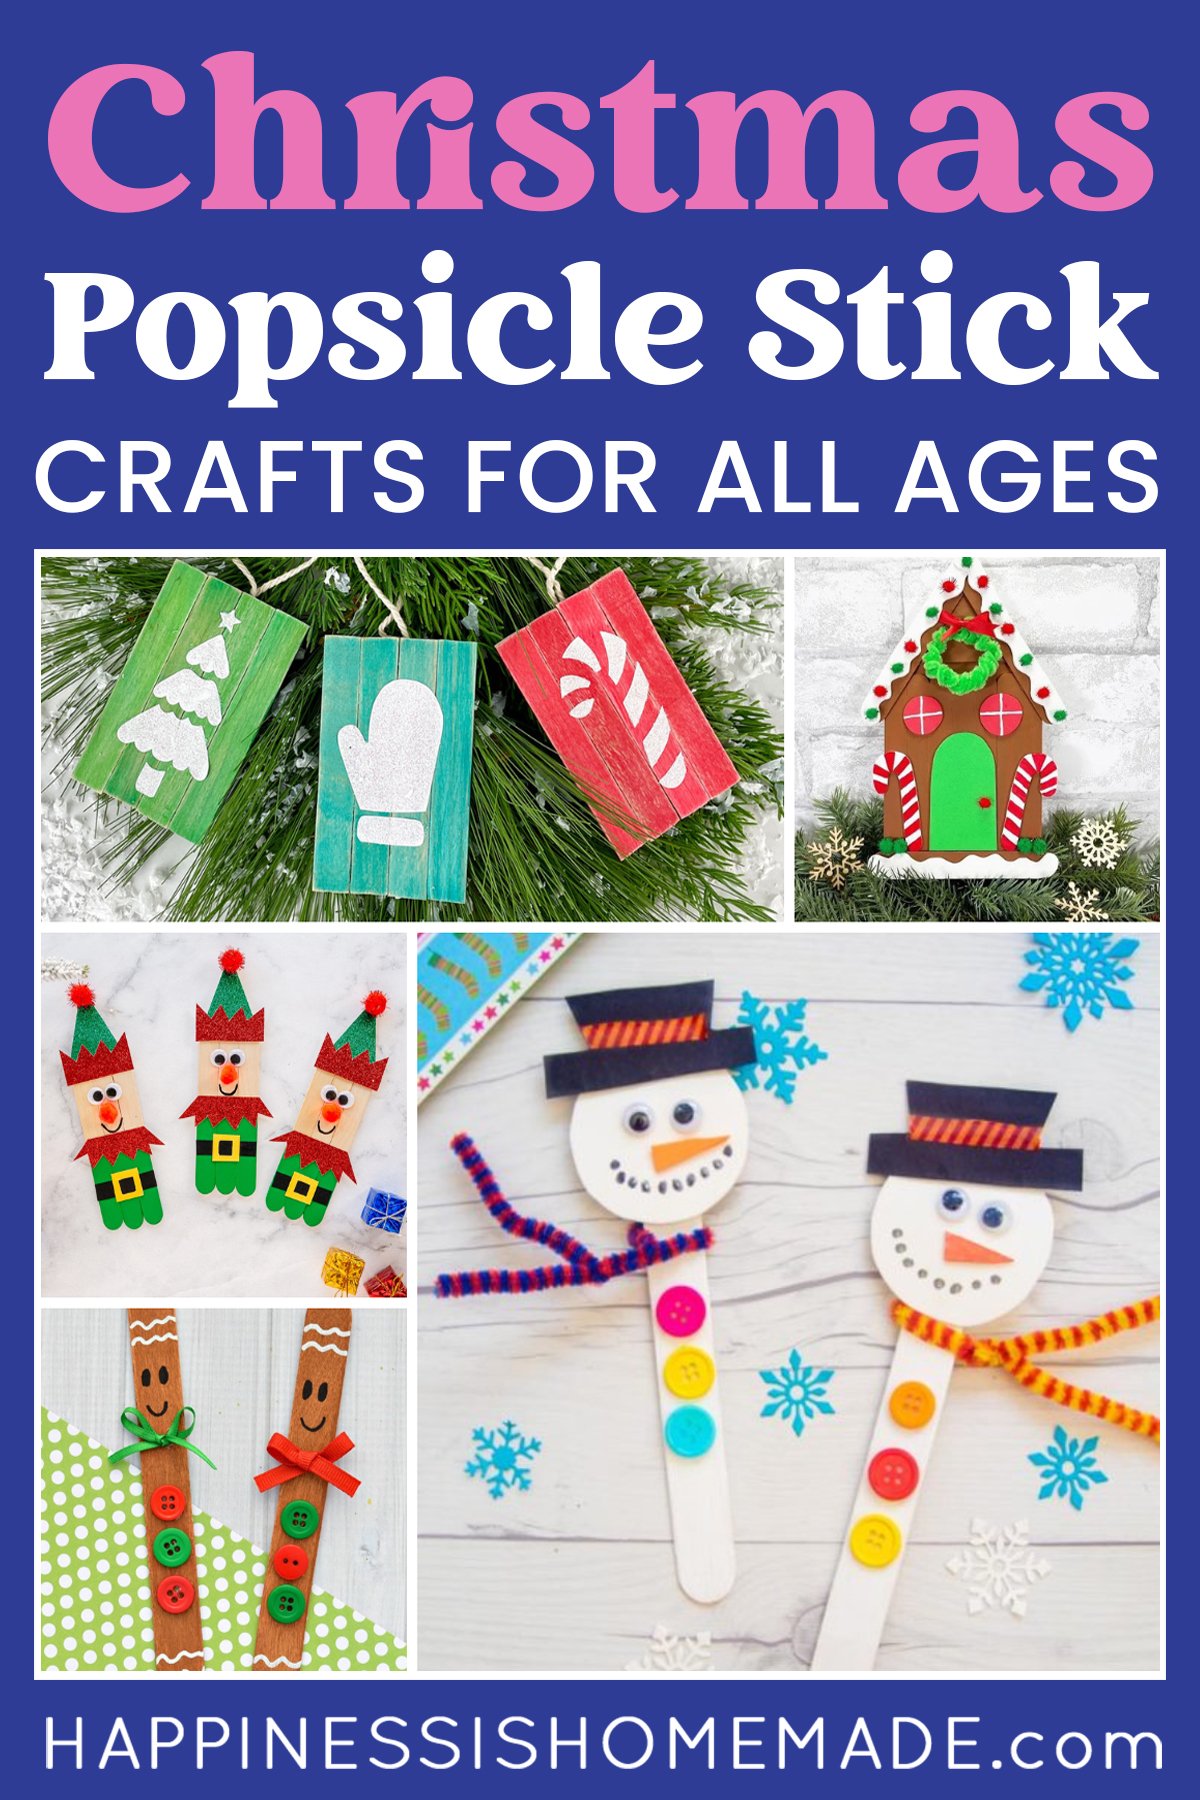 50+ Popsicle Stick Christmas Crafts